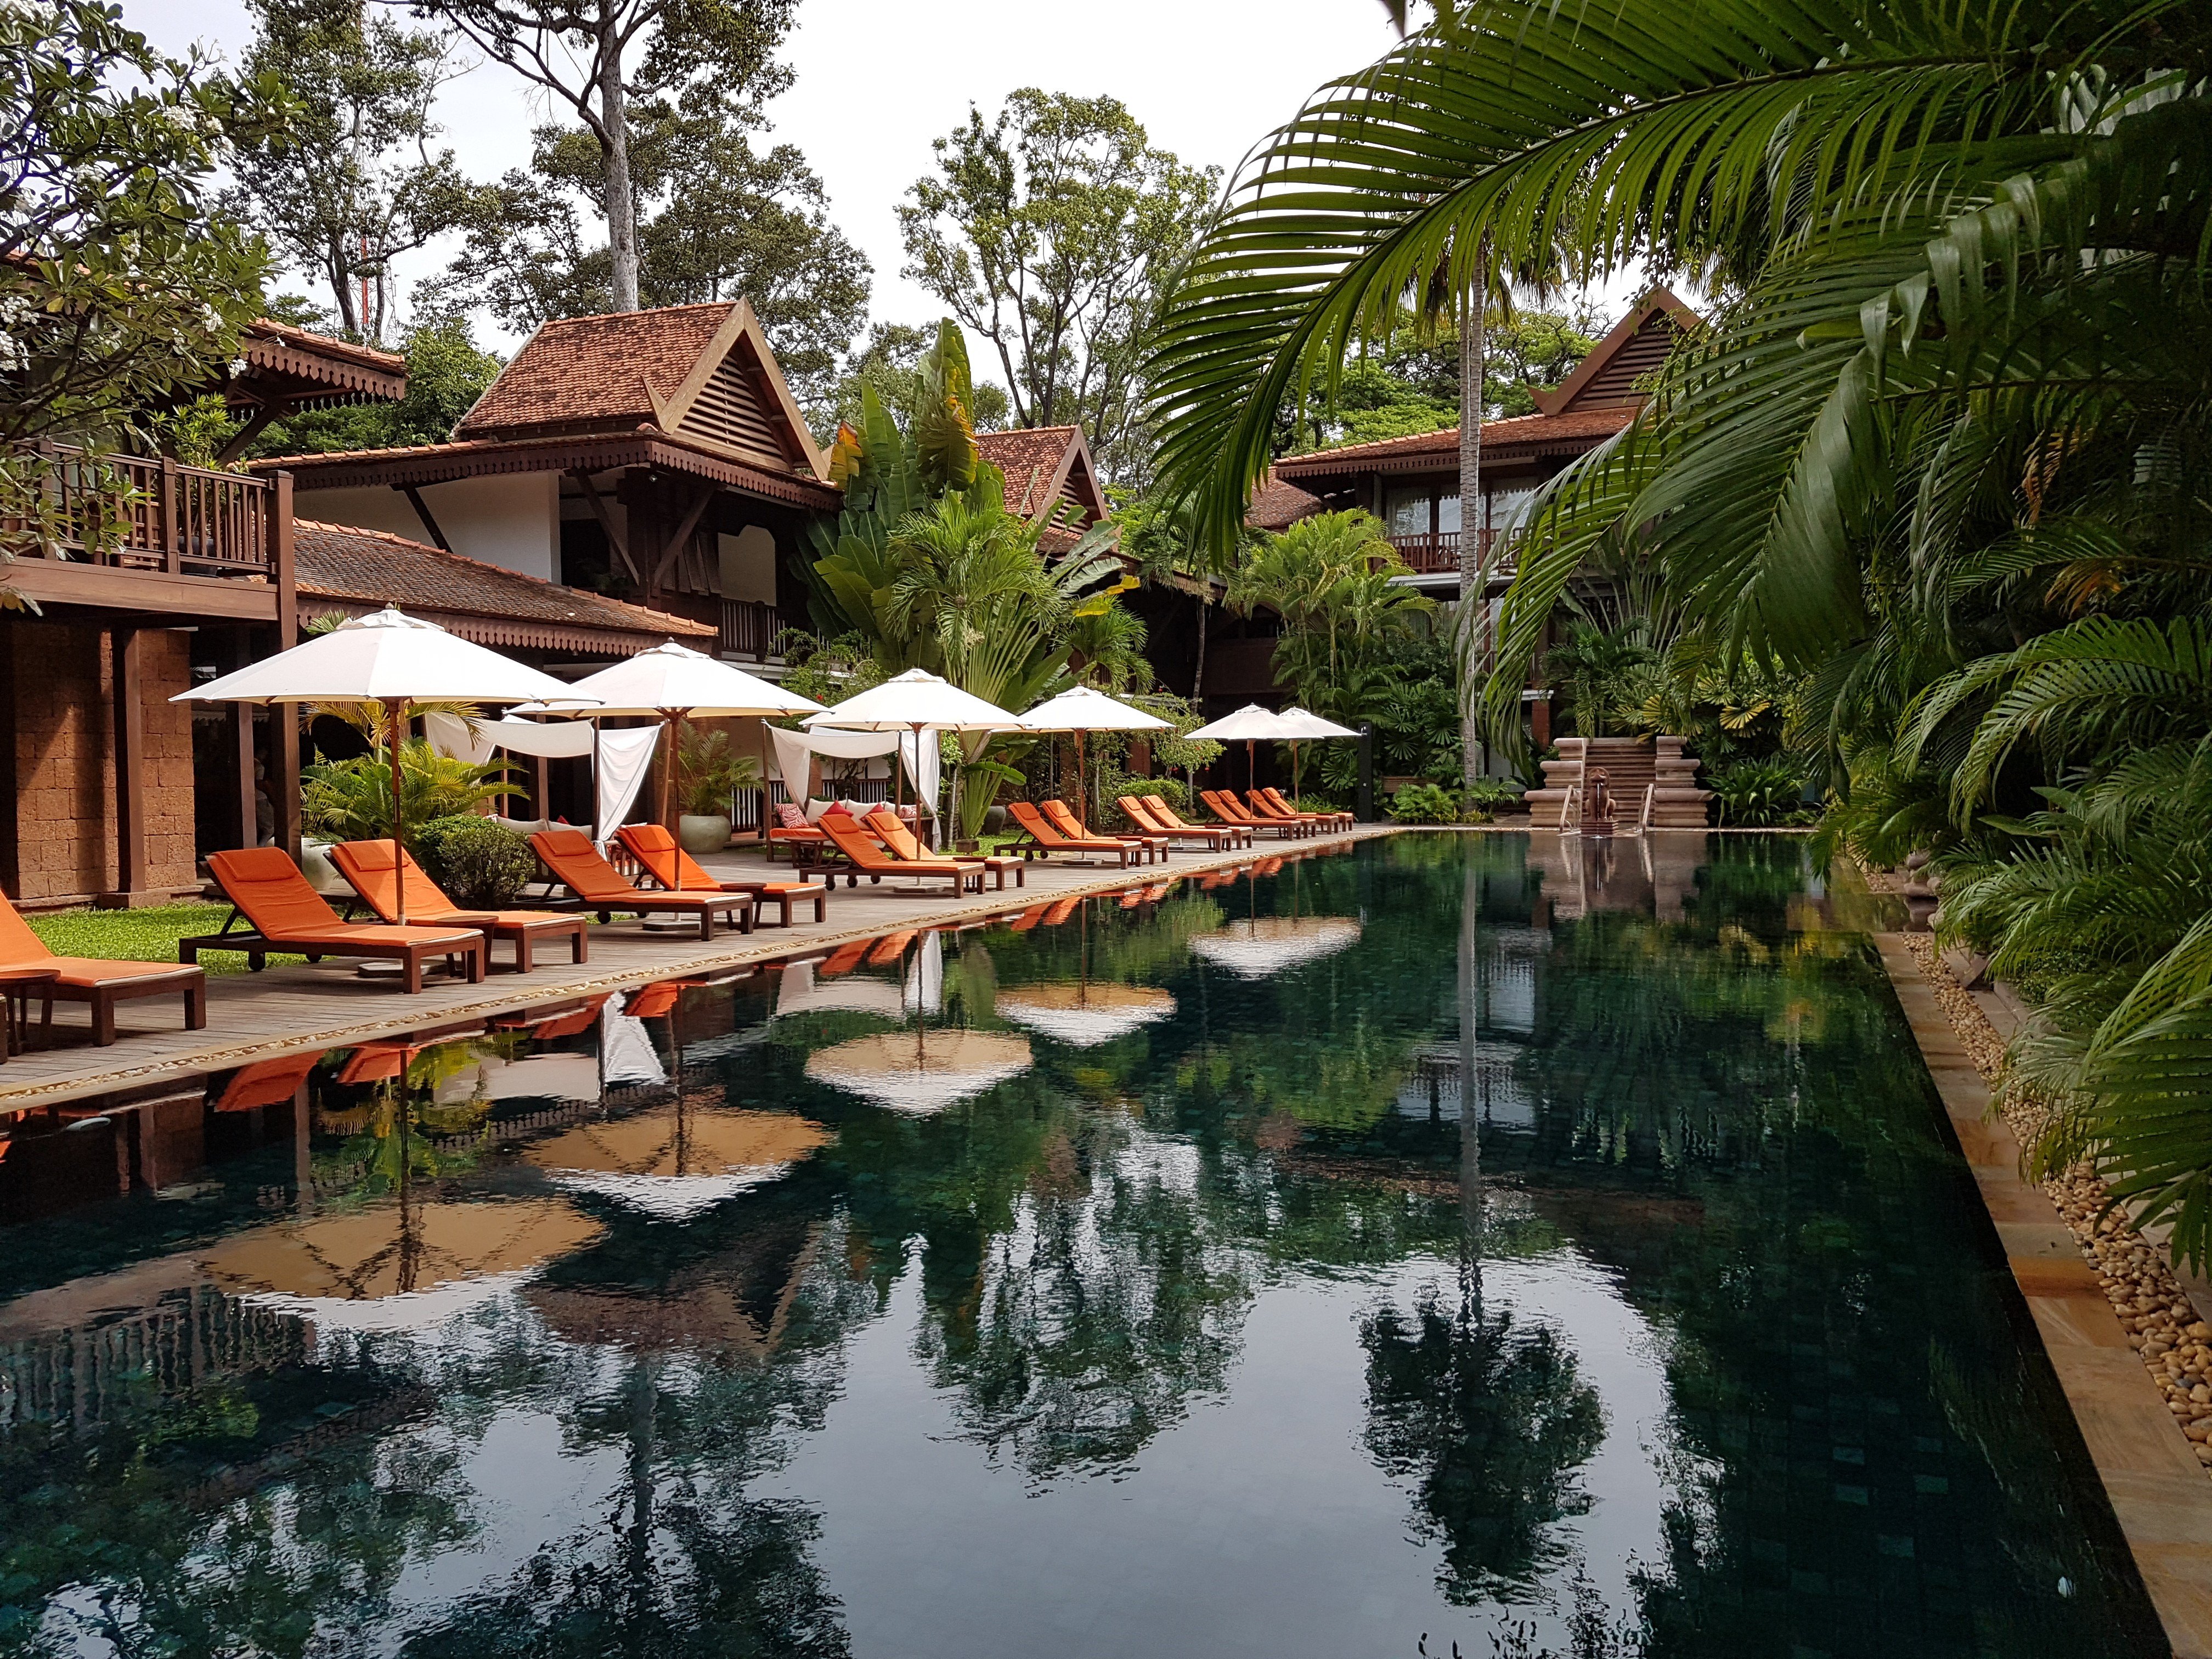 Belmond La Residence d’Angkor’s central lap pool shimmering like a luscious jewel is the resort’s most inviting feature. Photos: Cedric Tan